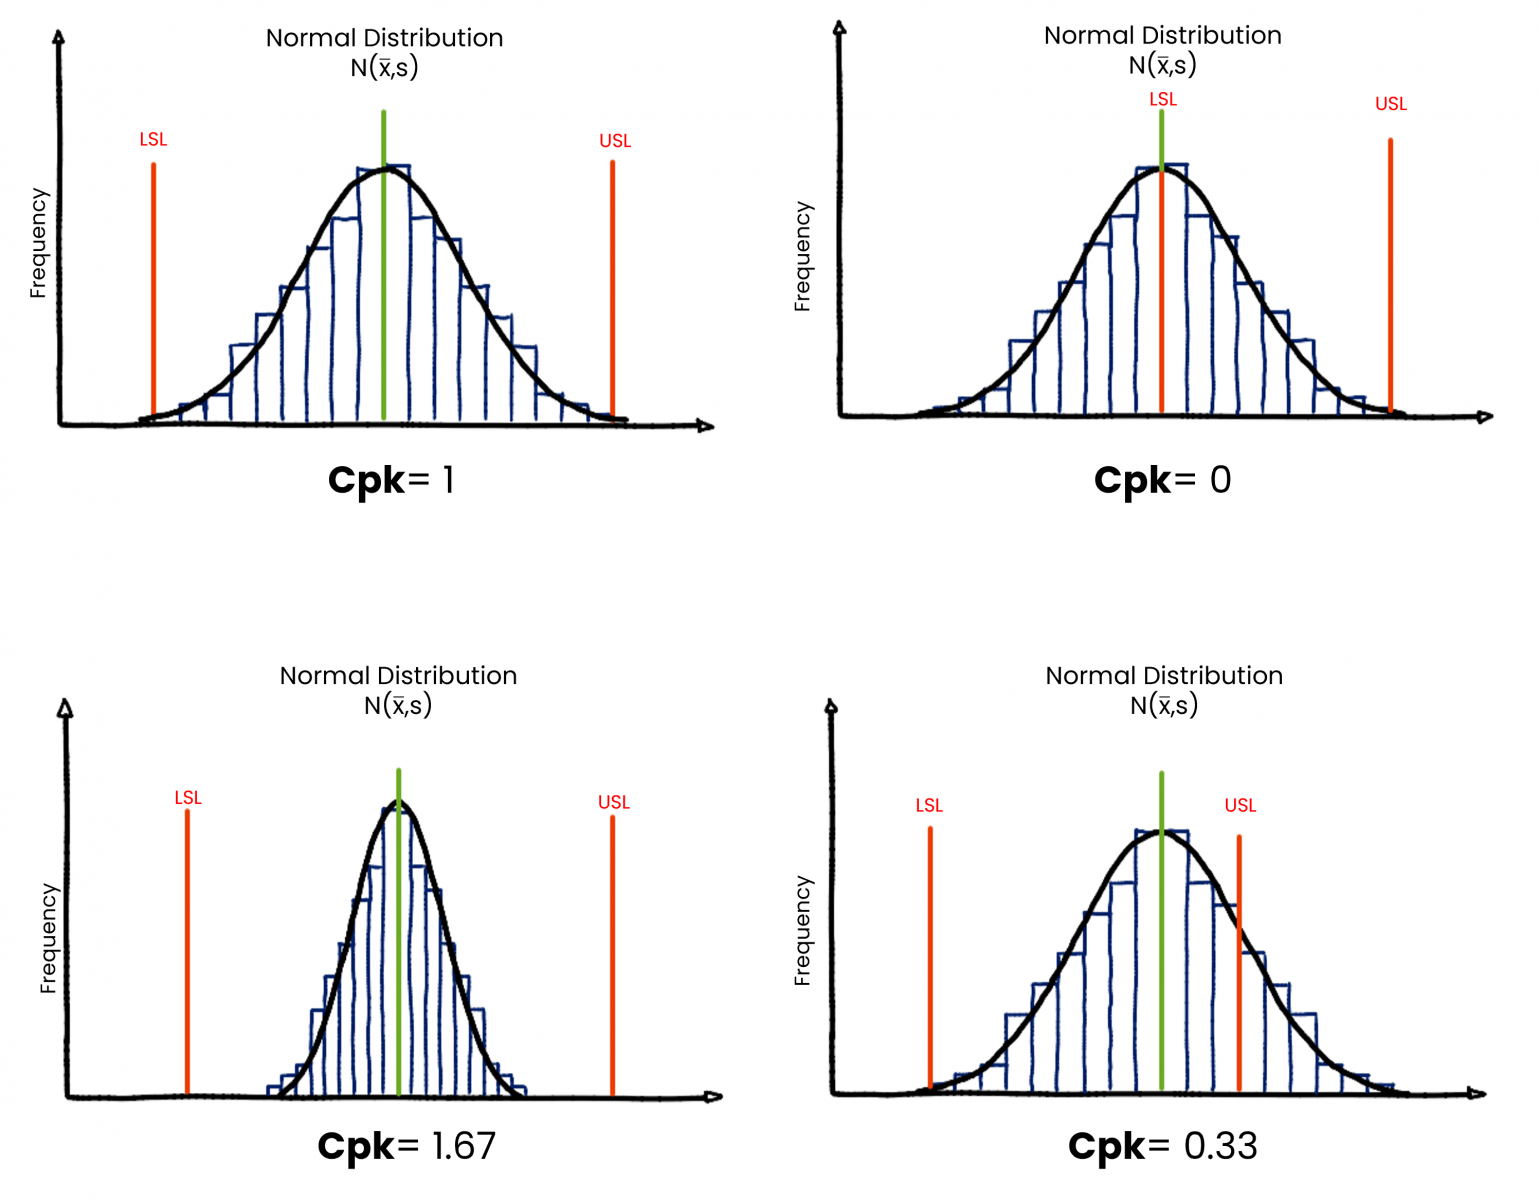 These normal distribution graphs visualize process capability depending on the spread of distribution and specification limits, upper and lower spec limit. 